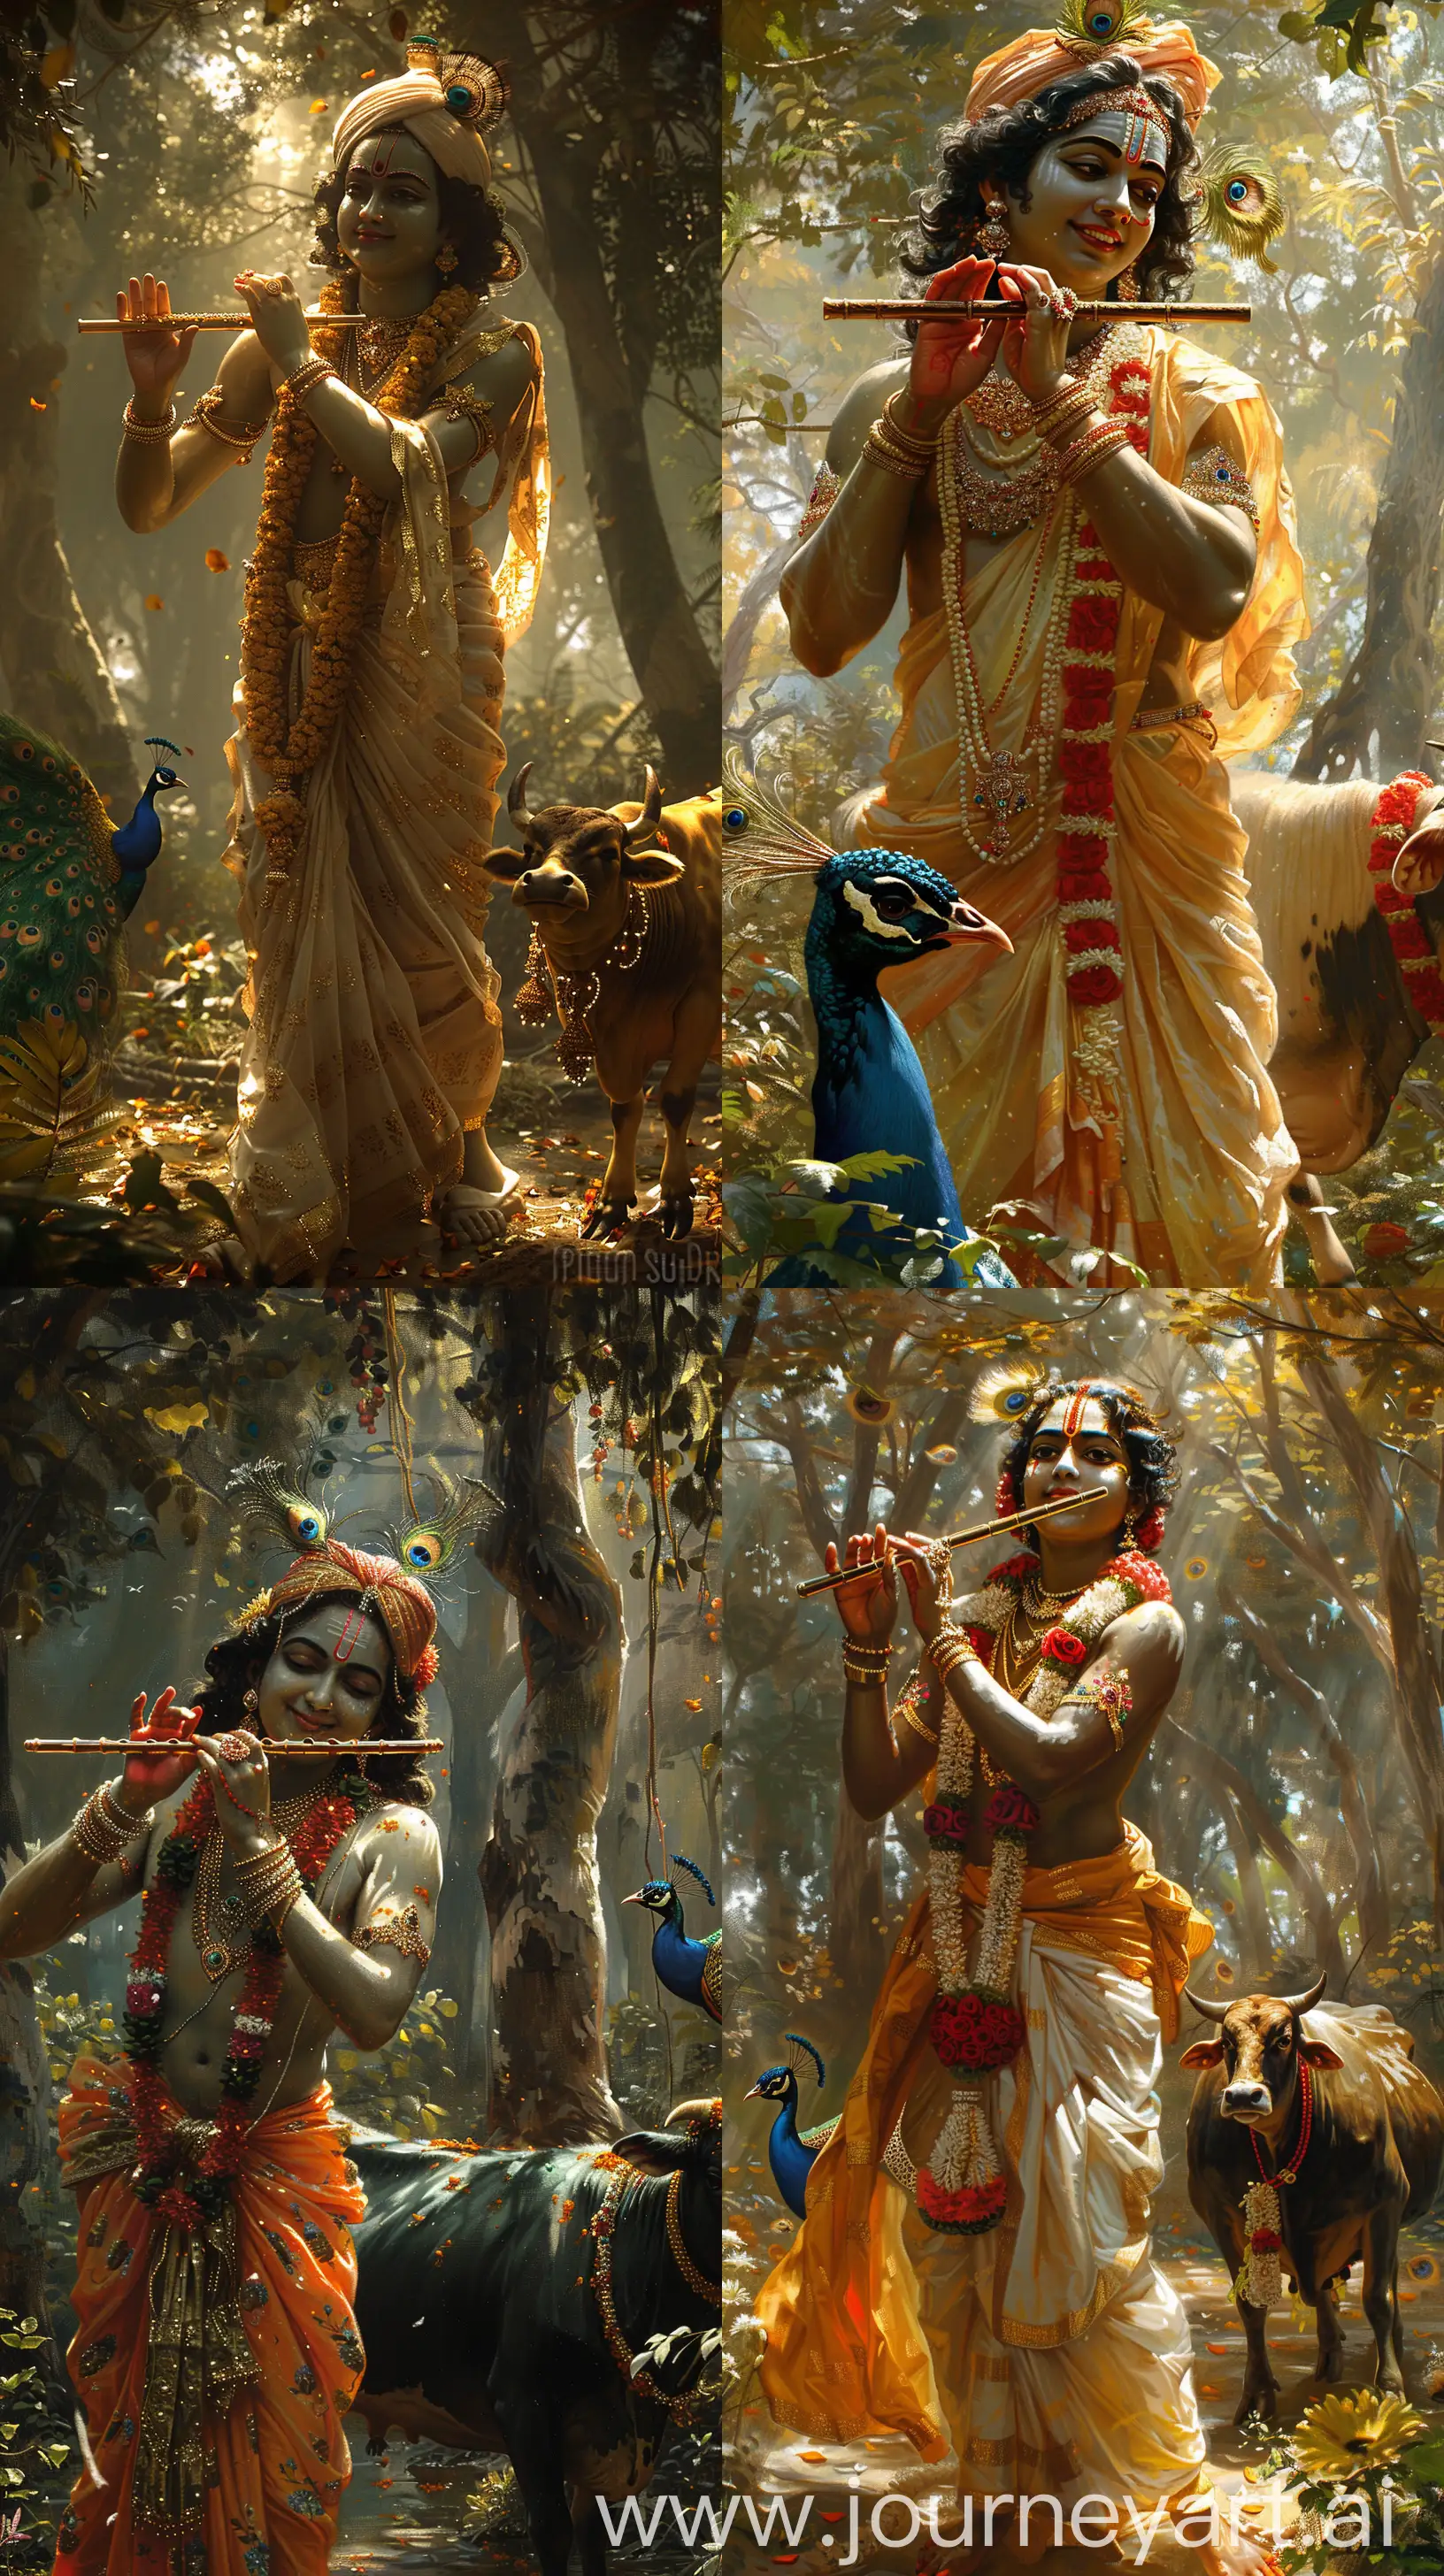 Handsome, serene smile, Lord Krishna with a divine glow in a tranquil forest, playing the flute, accompanied by his sacred cow, under a canopy of lush trees, soft dappled sunlight, peacocks in the background, traditional attire, realistic digital oil painting with attention to texture and vibrant colors typical of Rajasthani miniature art --ar 9:16 --s 750 --v 6